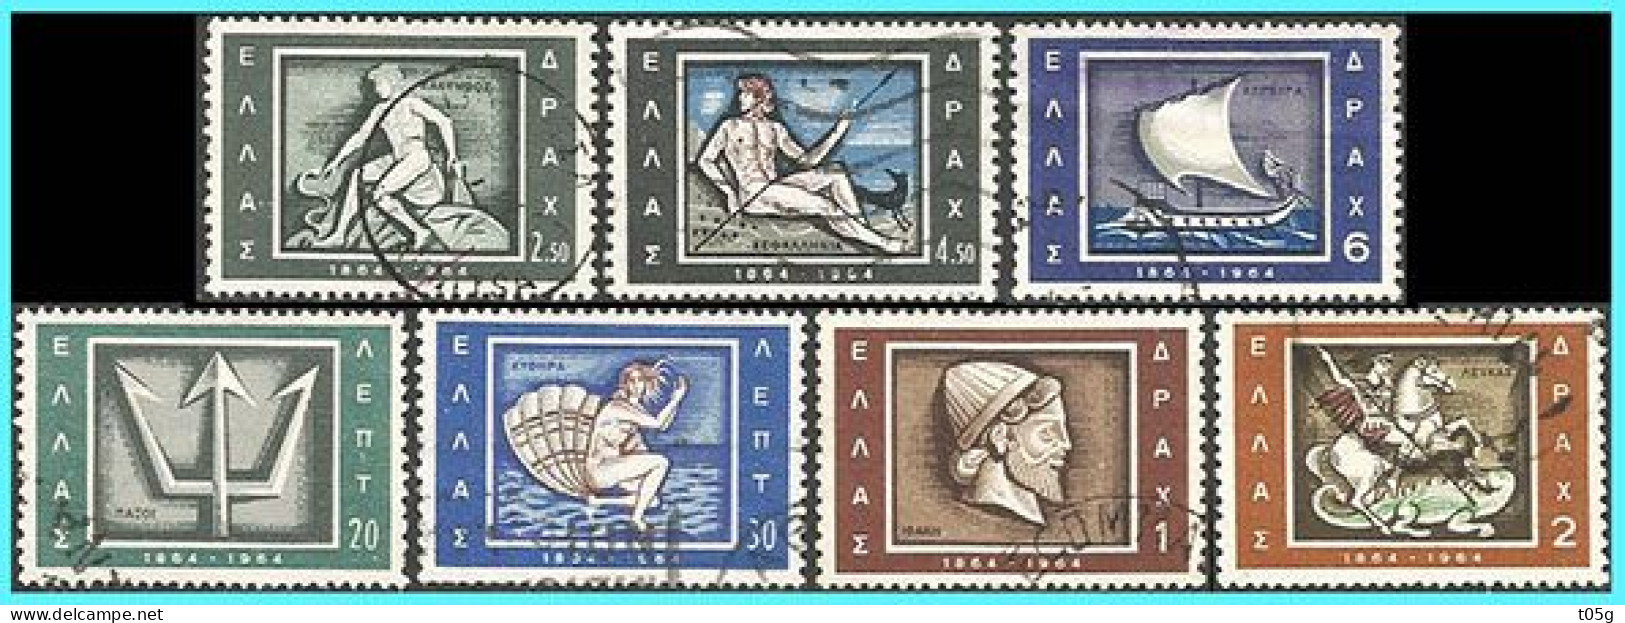 GREECE-GRECE - HELLAS 1964:  Ionian Islands   Compl.set Used. - Used Stamps